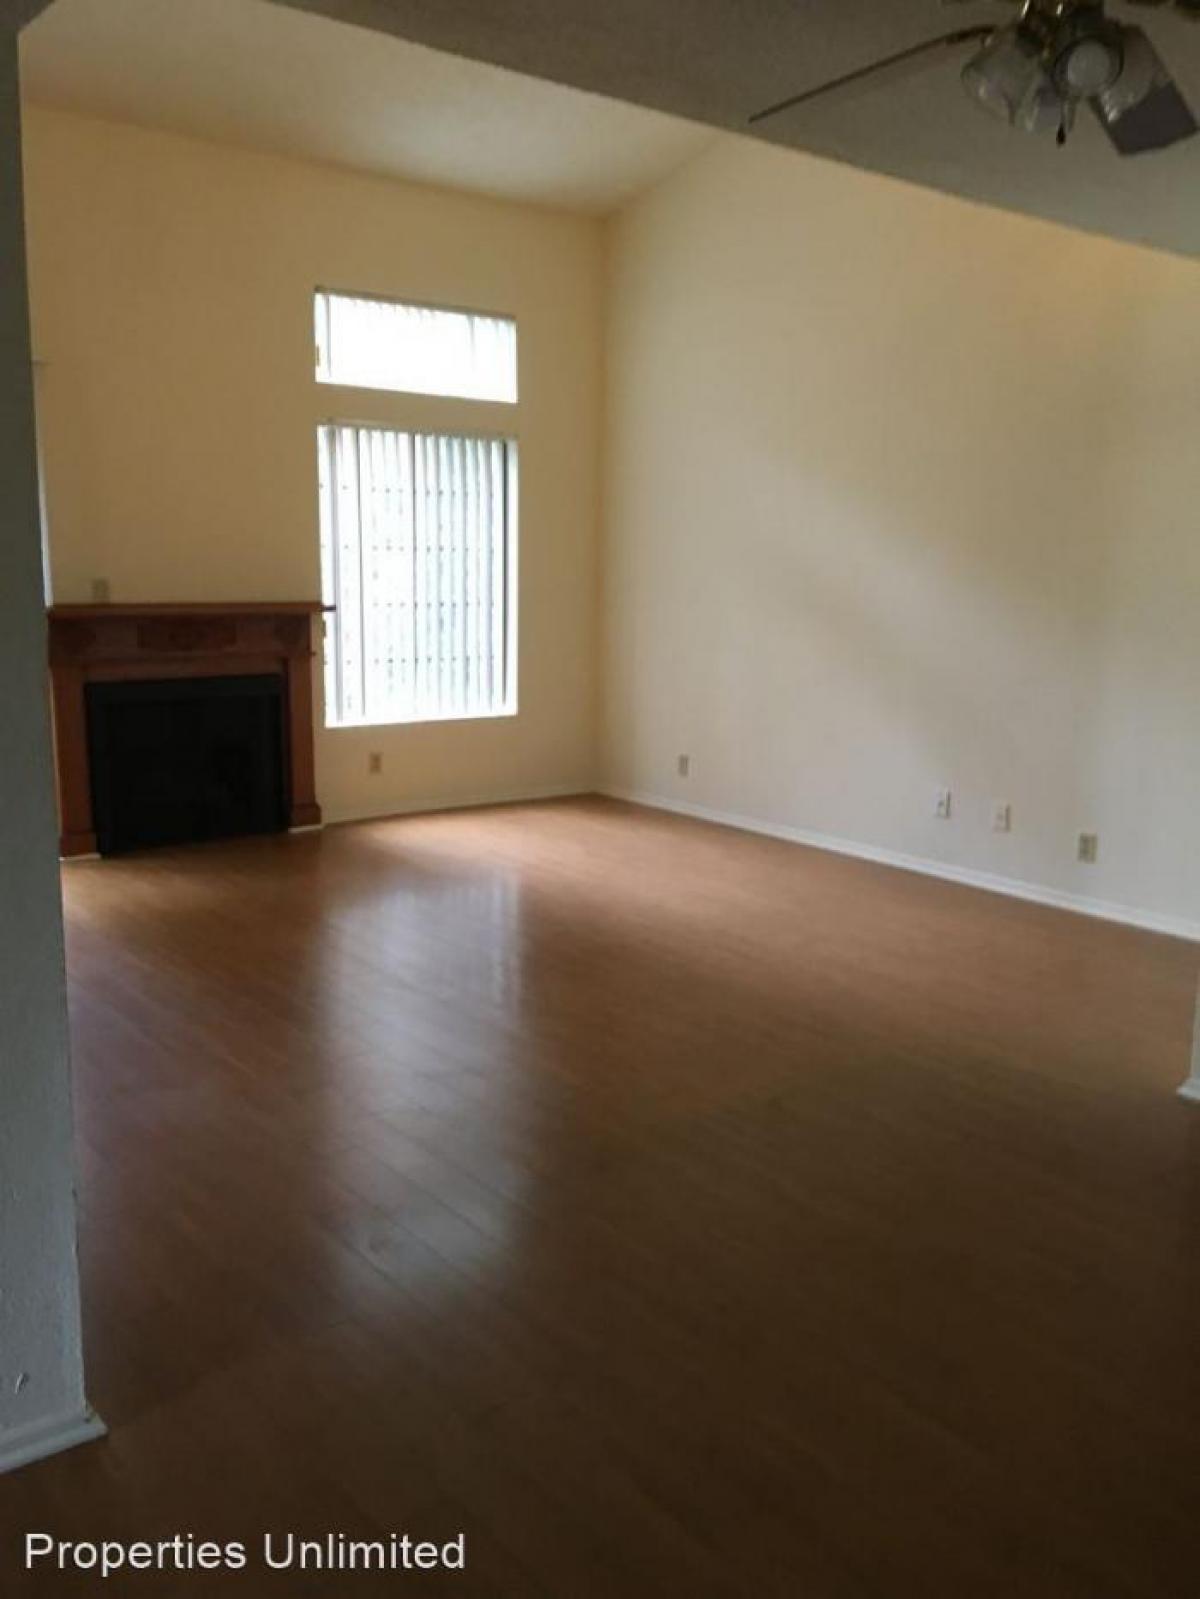 Picture of Apartment For Rent in Valley Village, California, United States